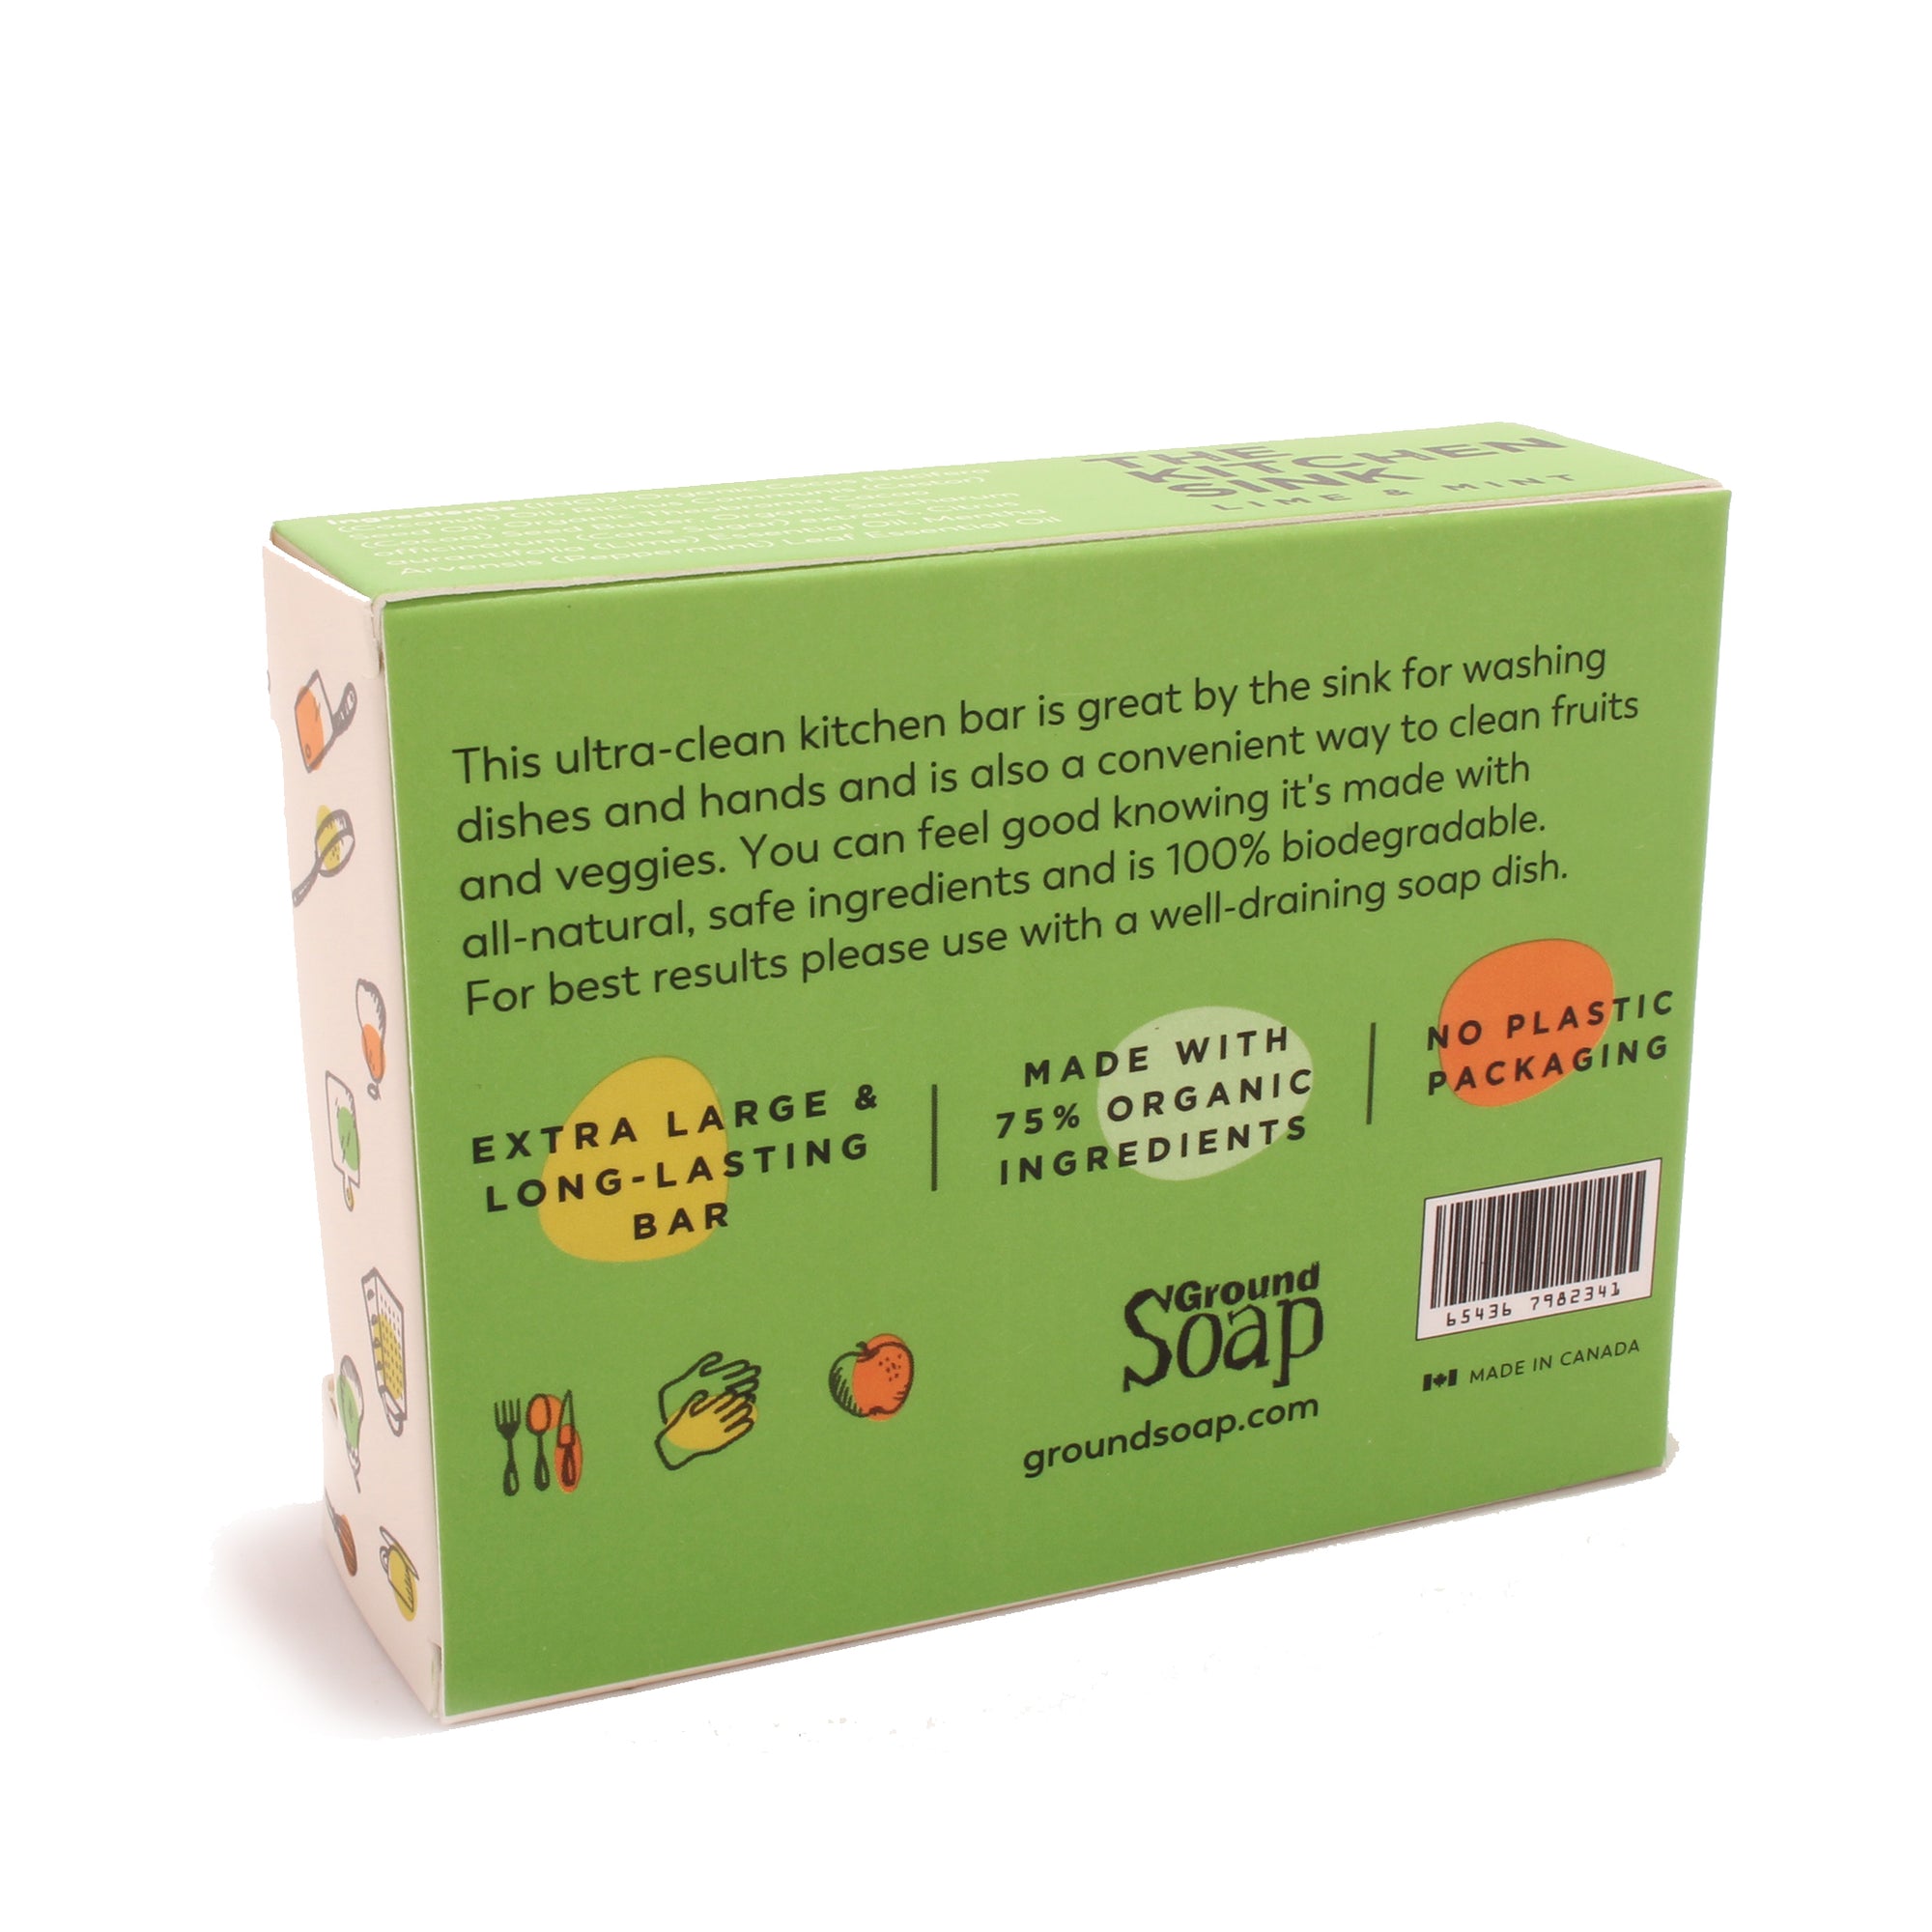 A bar of the Kitchen Sink soap bar for the kitchen back of the box.